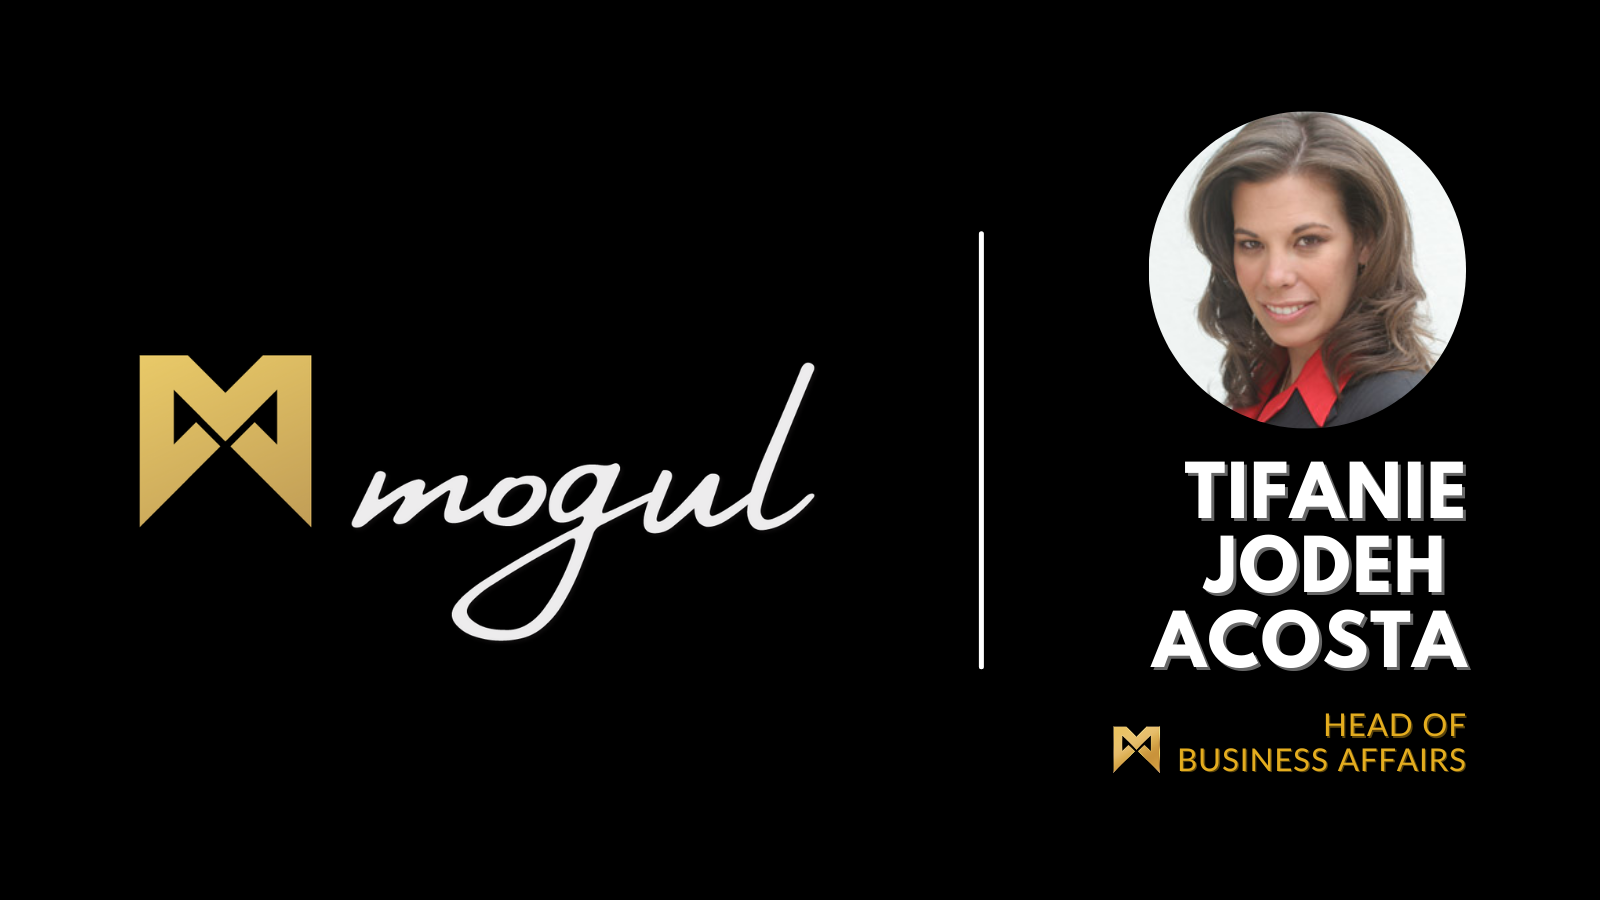 Entertainment Lawyer Tifanie Jodeh Acosta Joins Mogul Productions as Head of Business Affairs